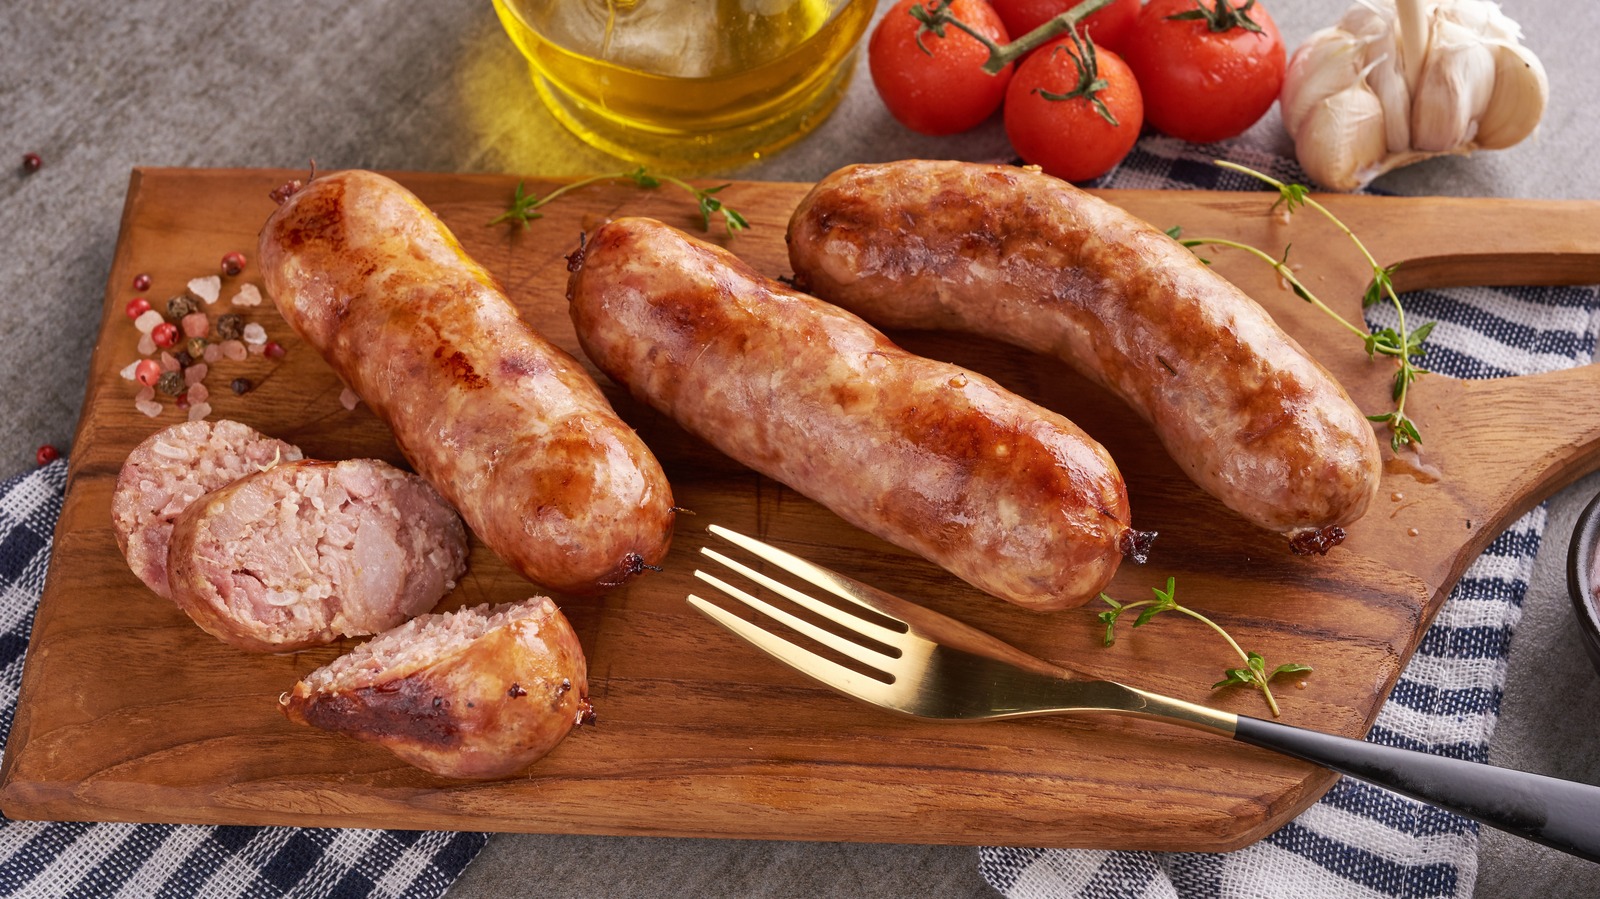 When Should You Take the Casing Off Sausage